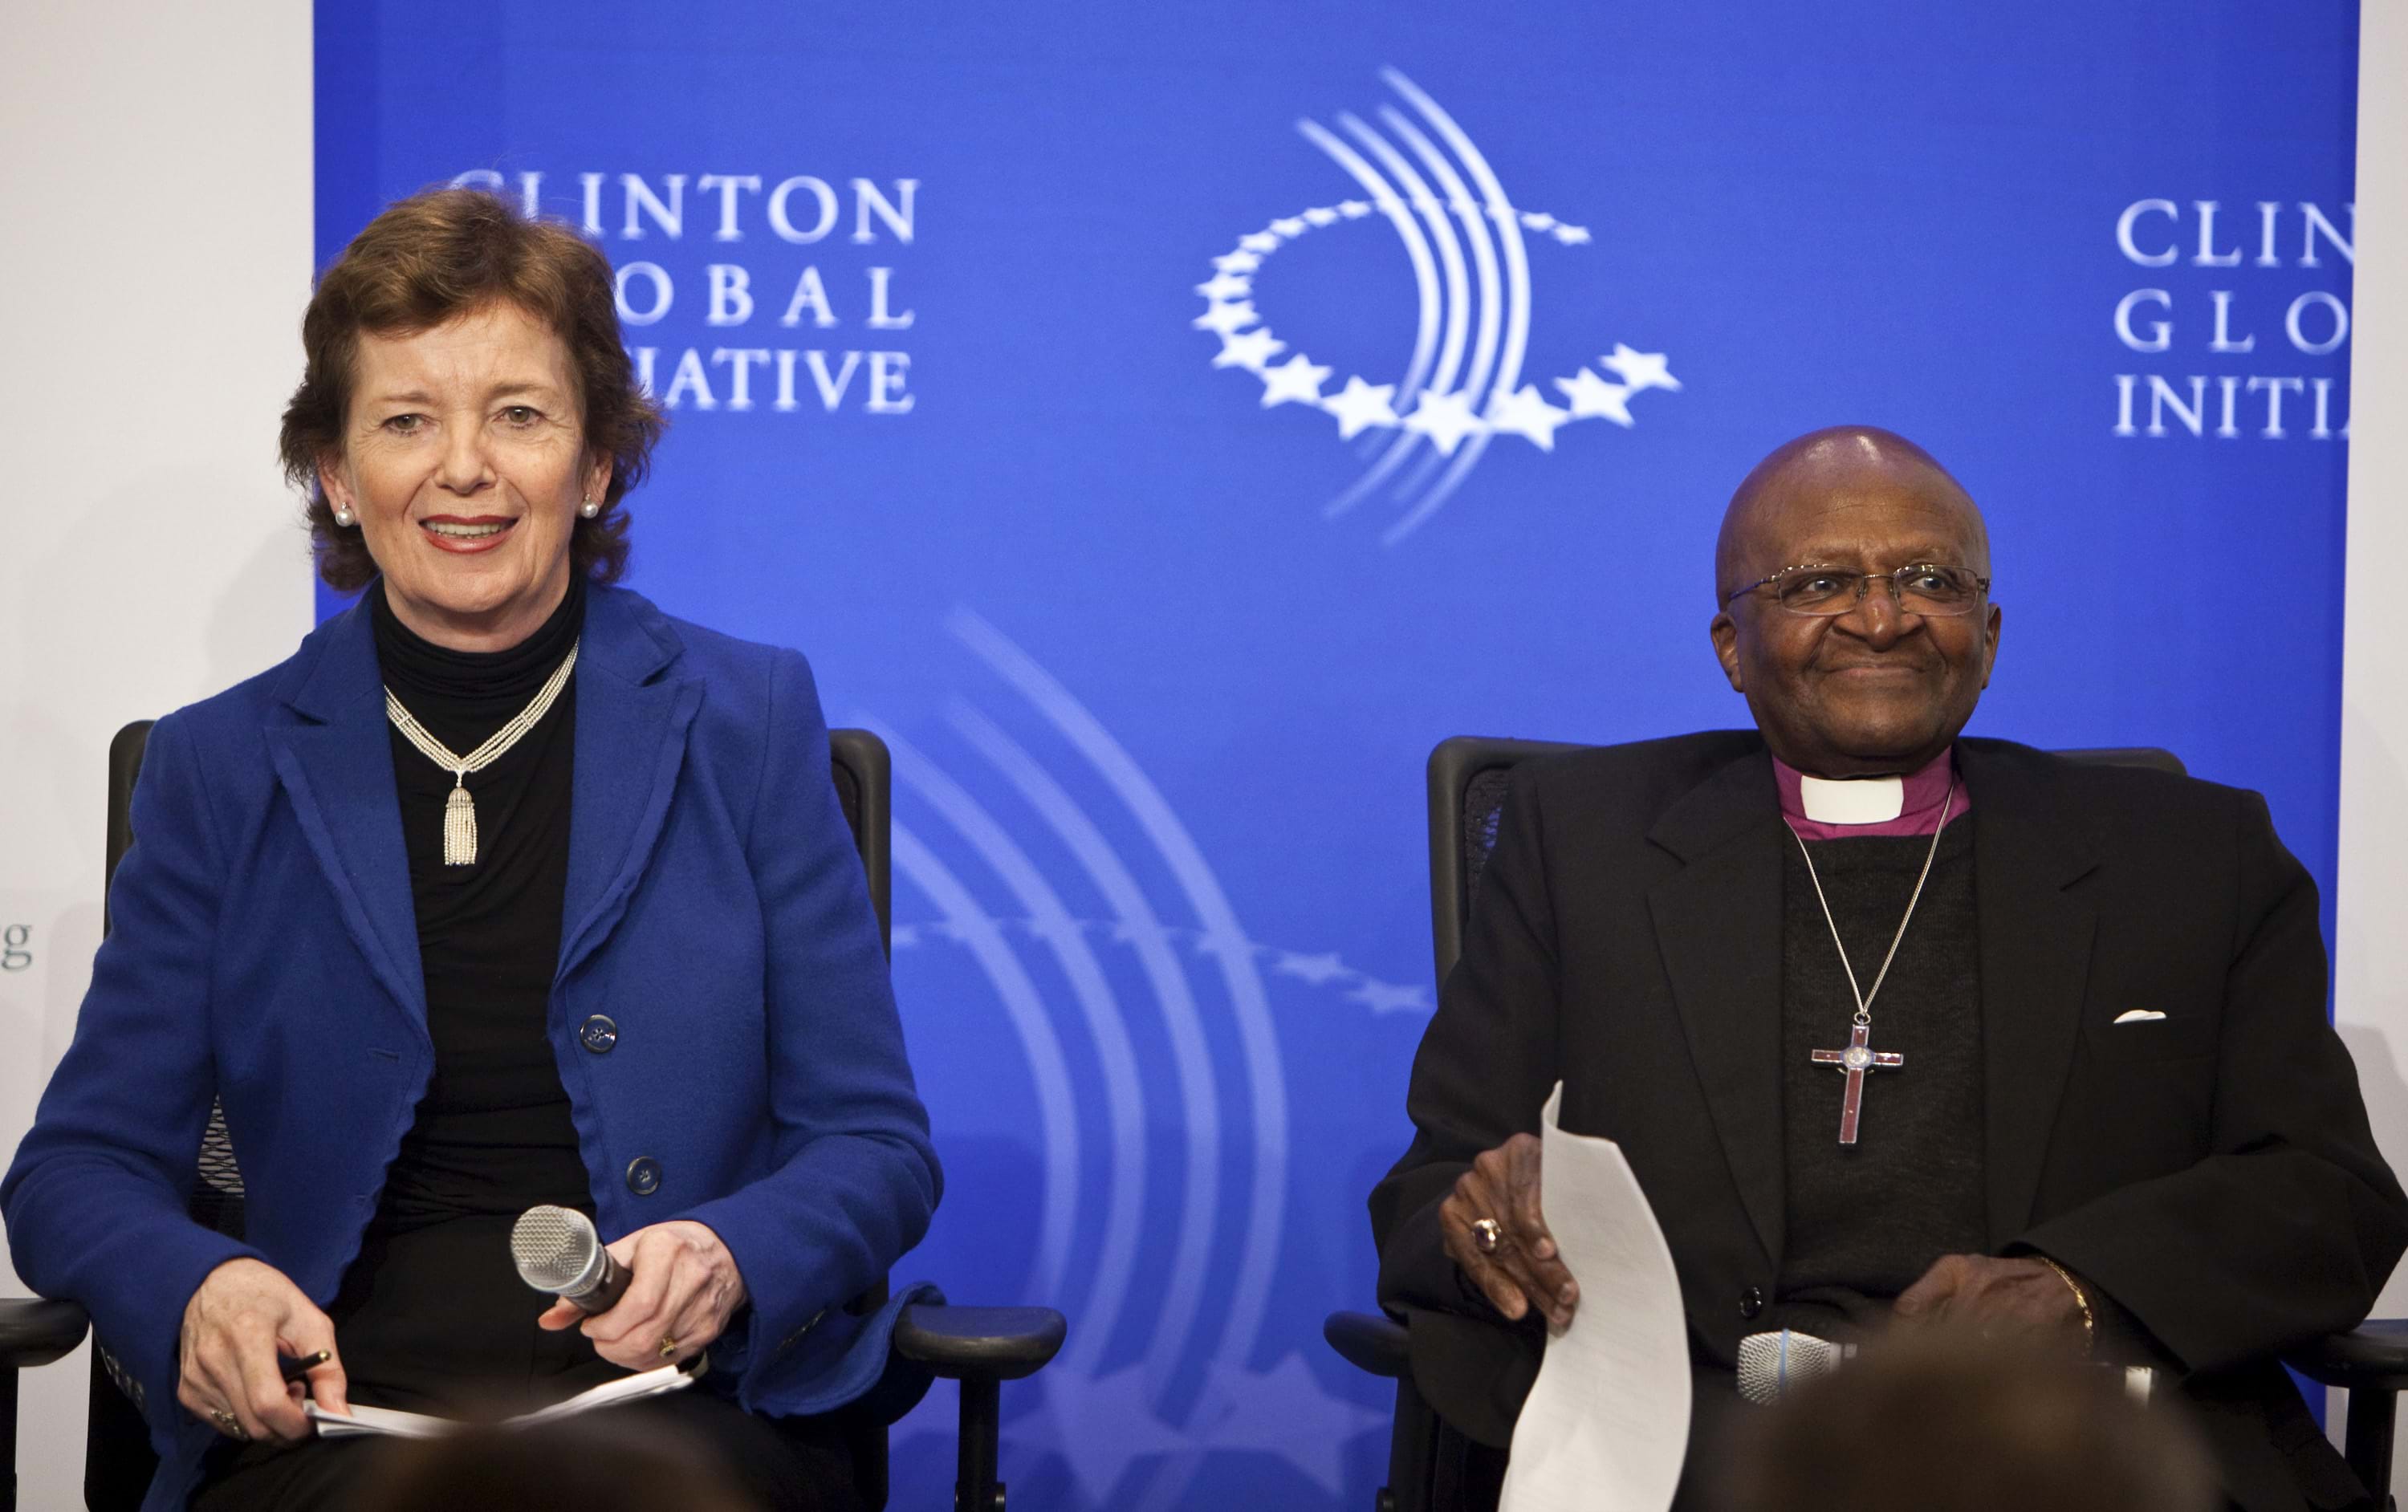 Mary Robinson and Desmond Tutu sit next to each other in front of a blue backdrop that has the Clinton Global Initiative logo on it.